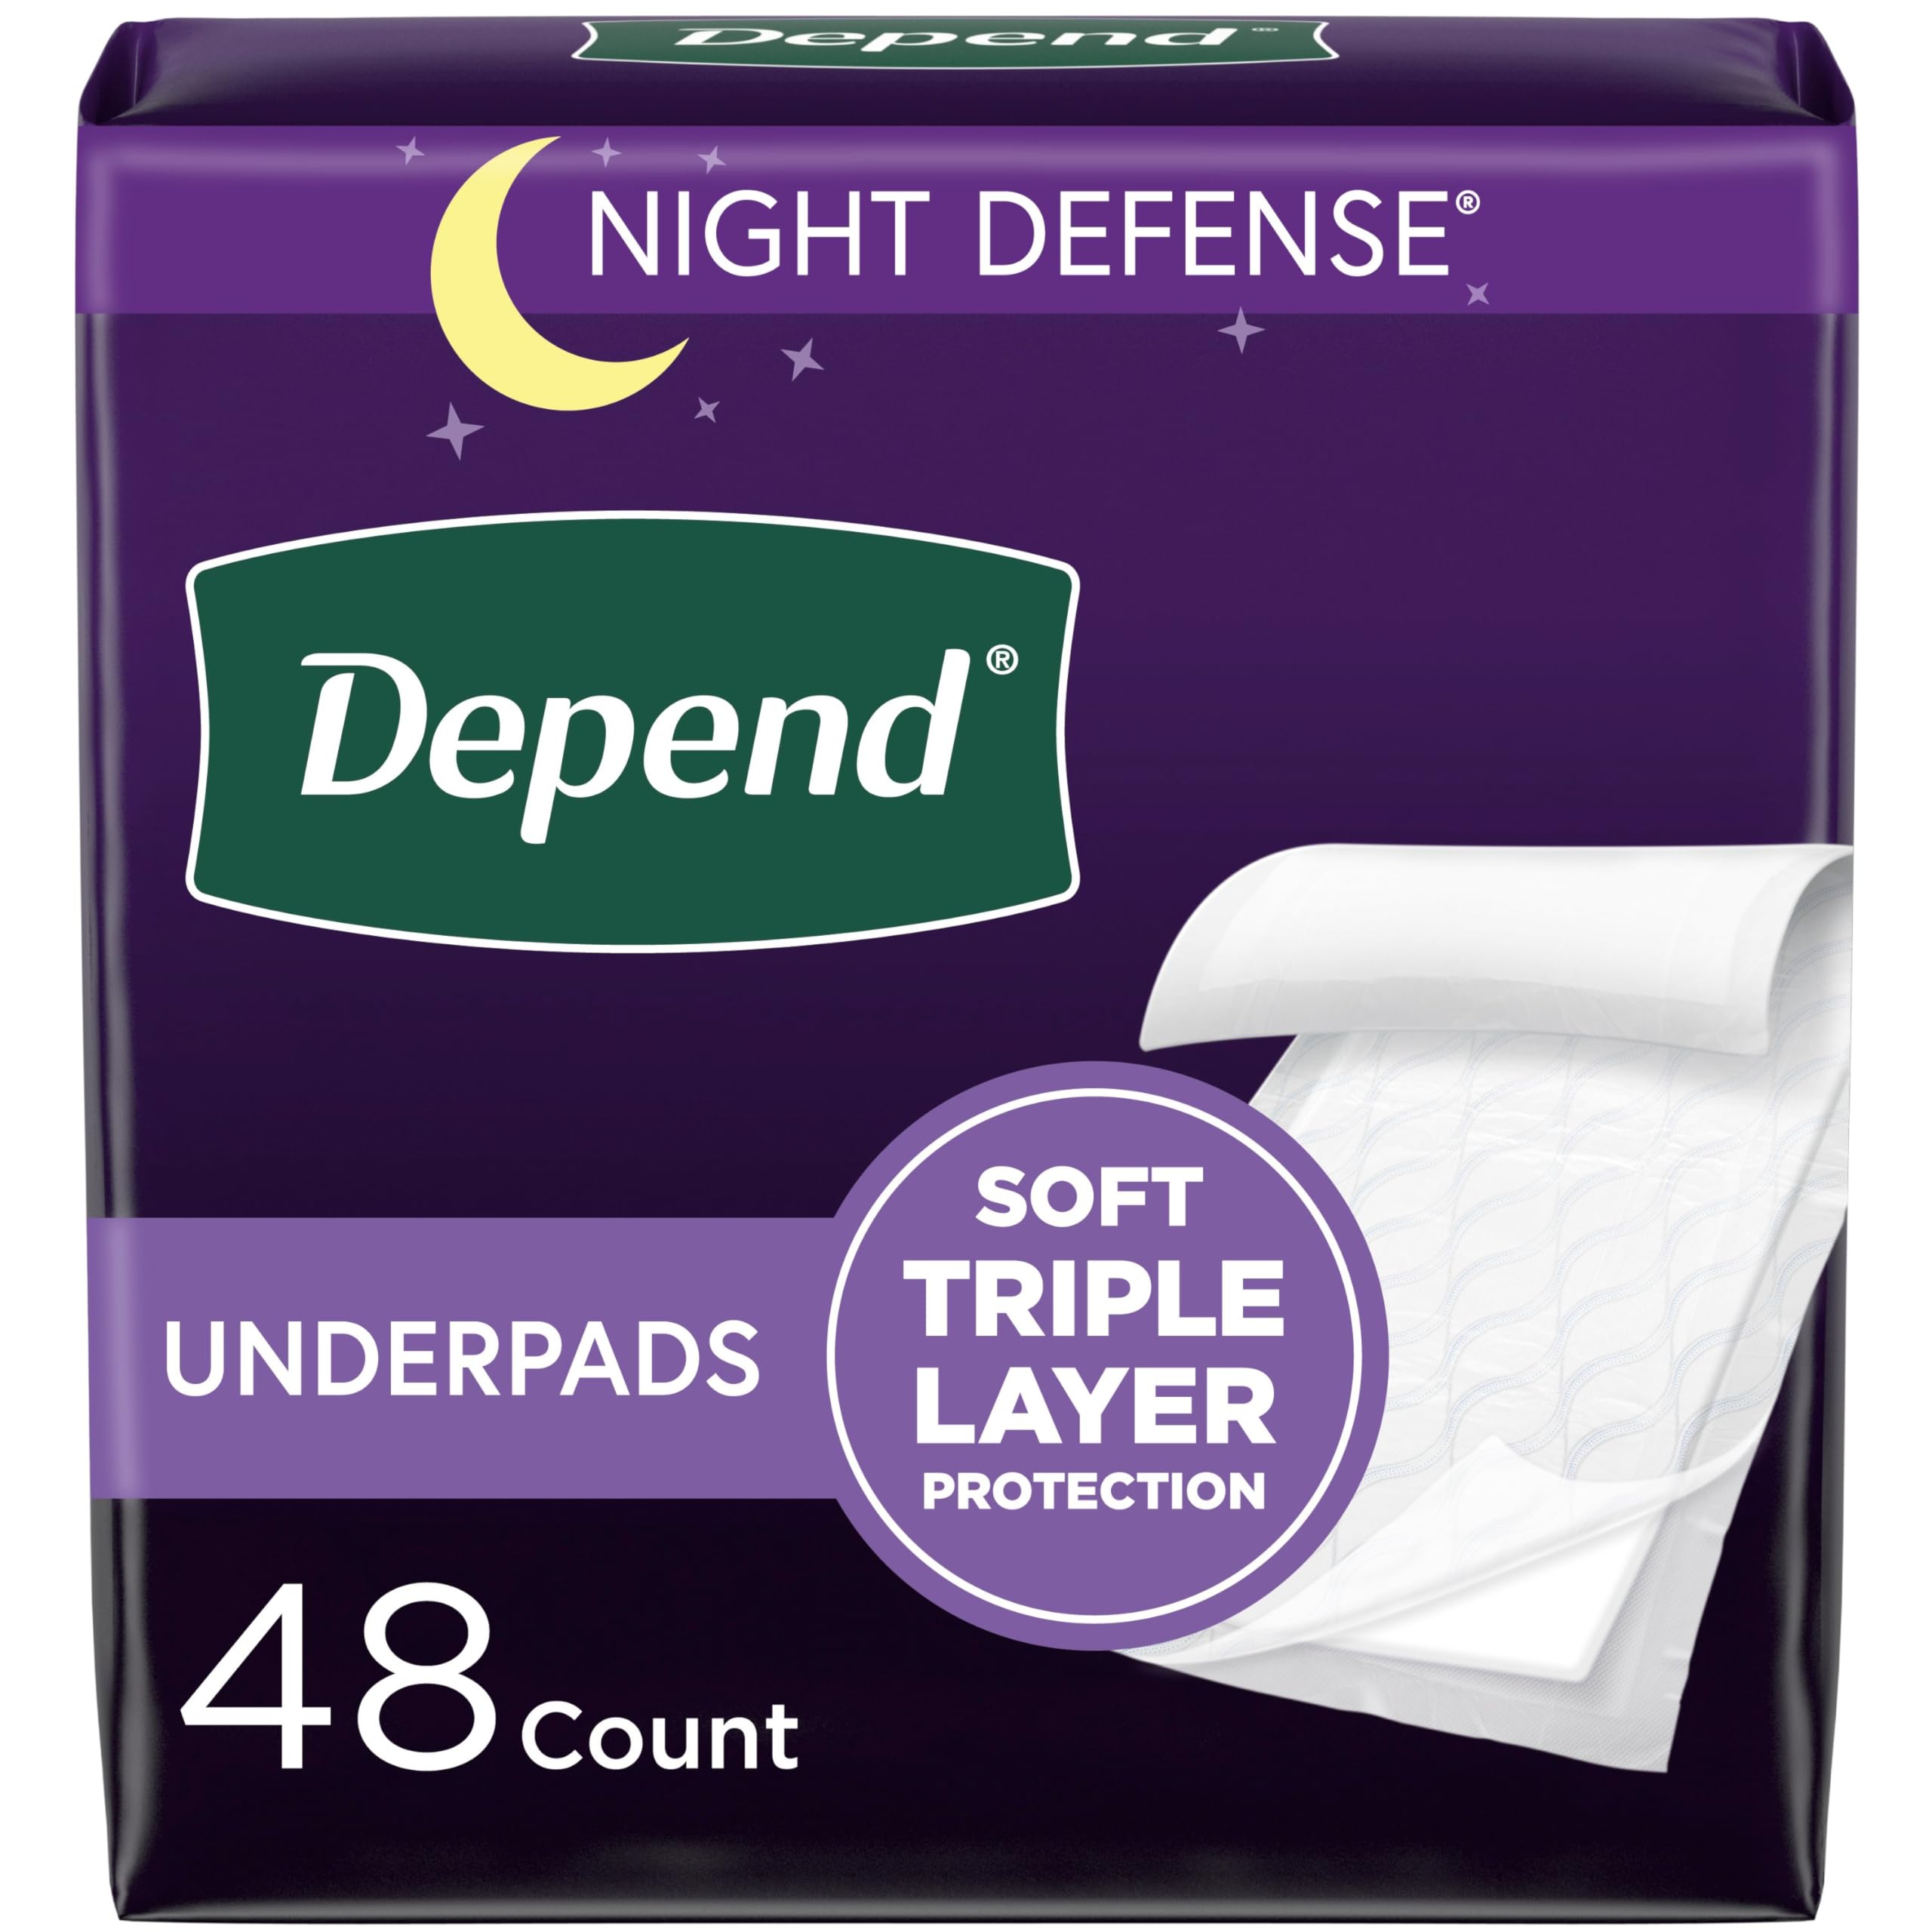 Depend Underpads - Disposable Incontinence Bed Pads, Triple Layer Absorbency for Adults, Kids, and Pets, Slip Resistant, 36"x 21", 48 Count (4 Packs of 12) (Packaging May Vary)